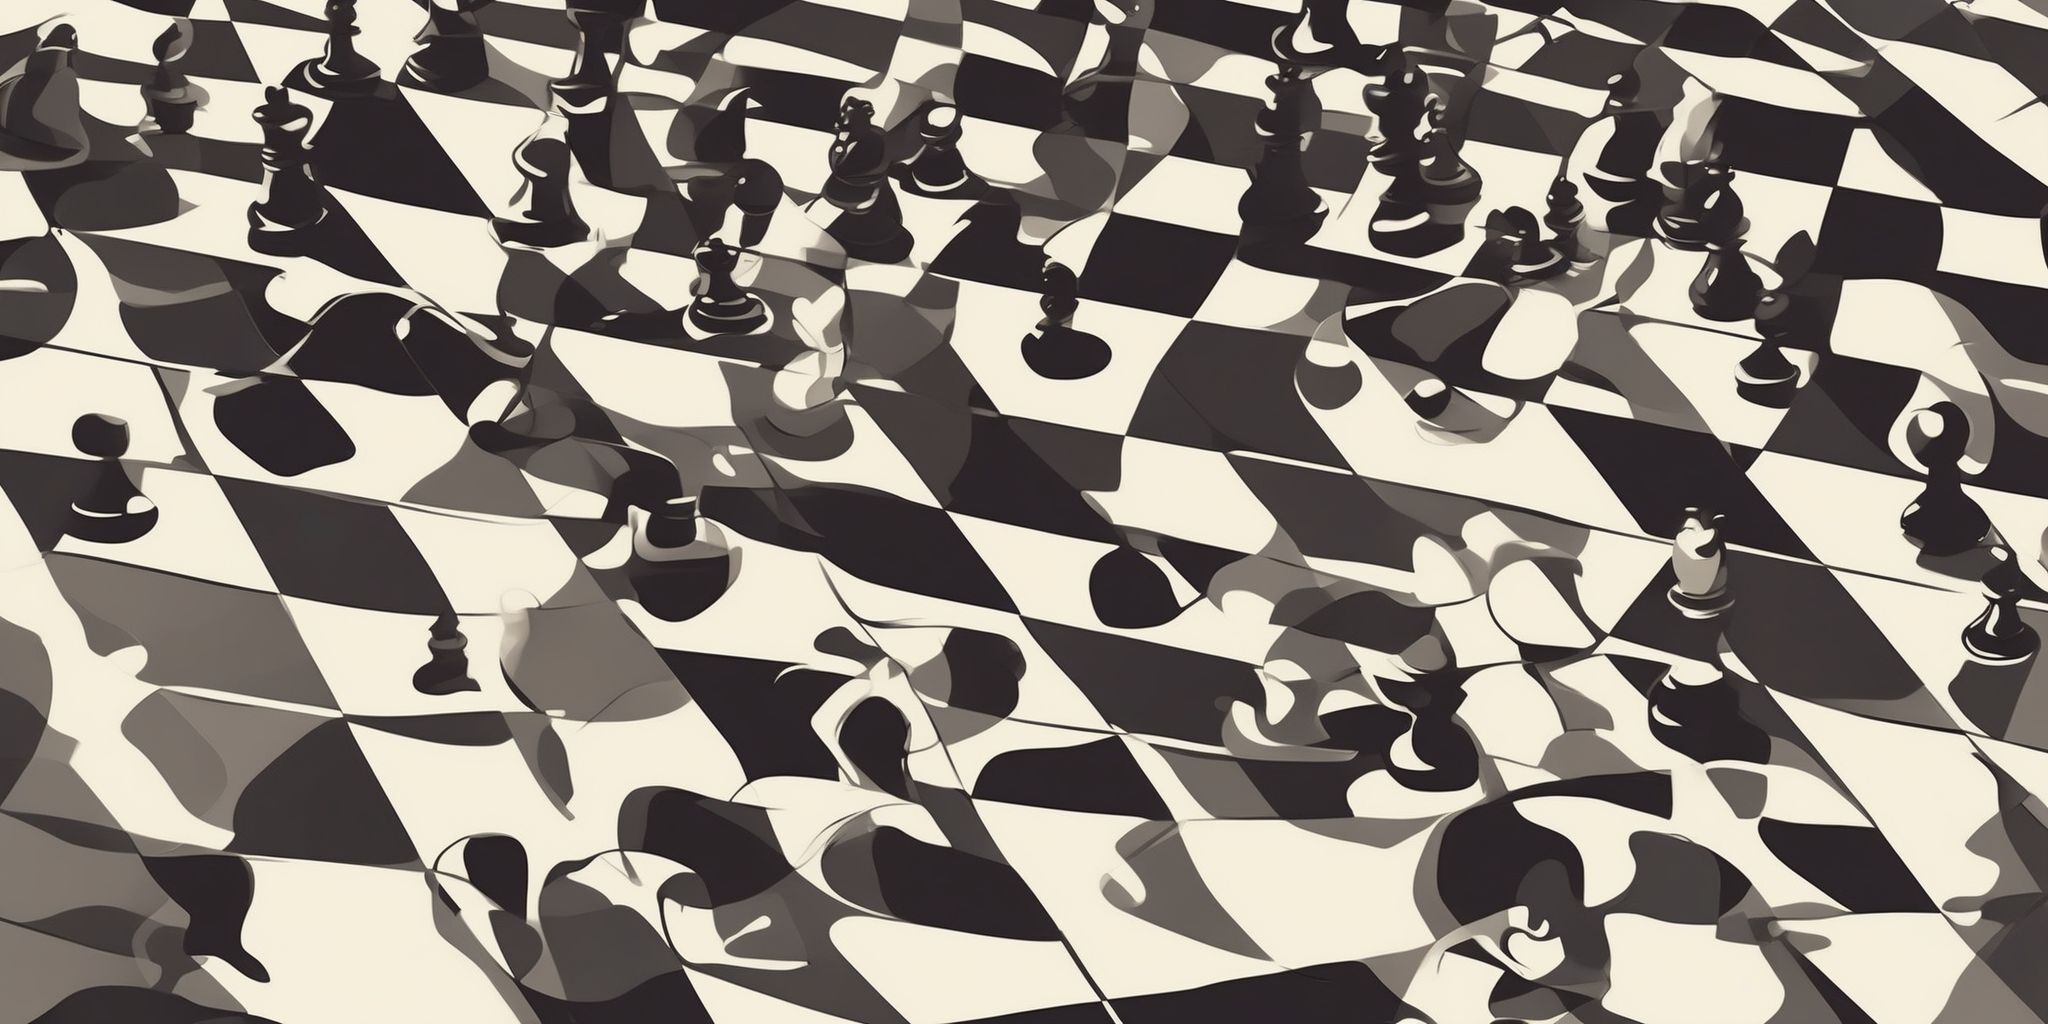 Chessboard in illustration style with gradients and white background